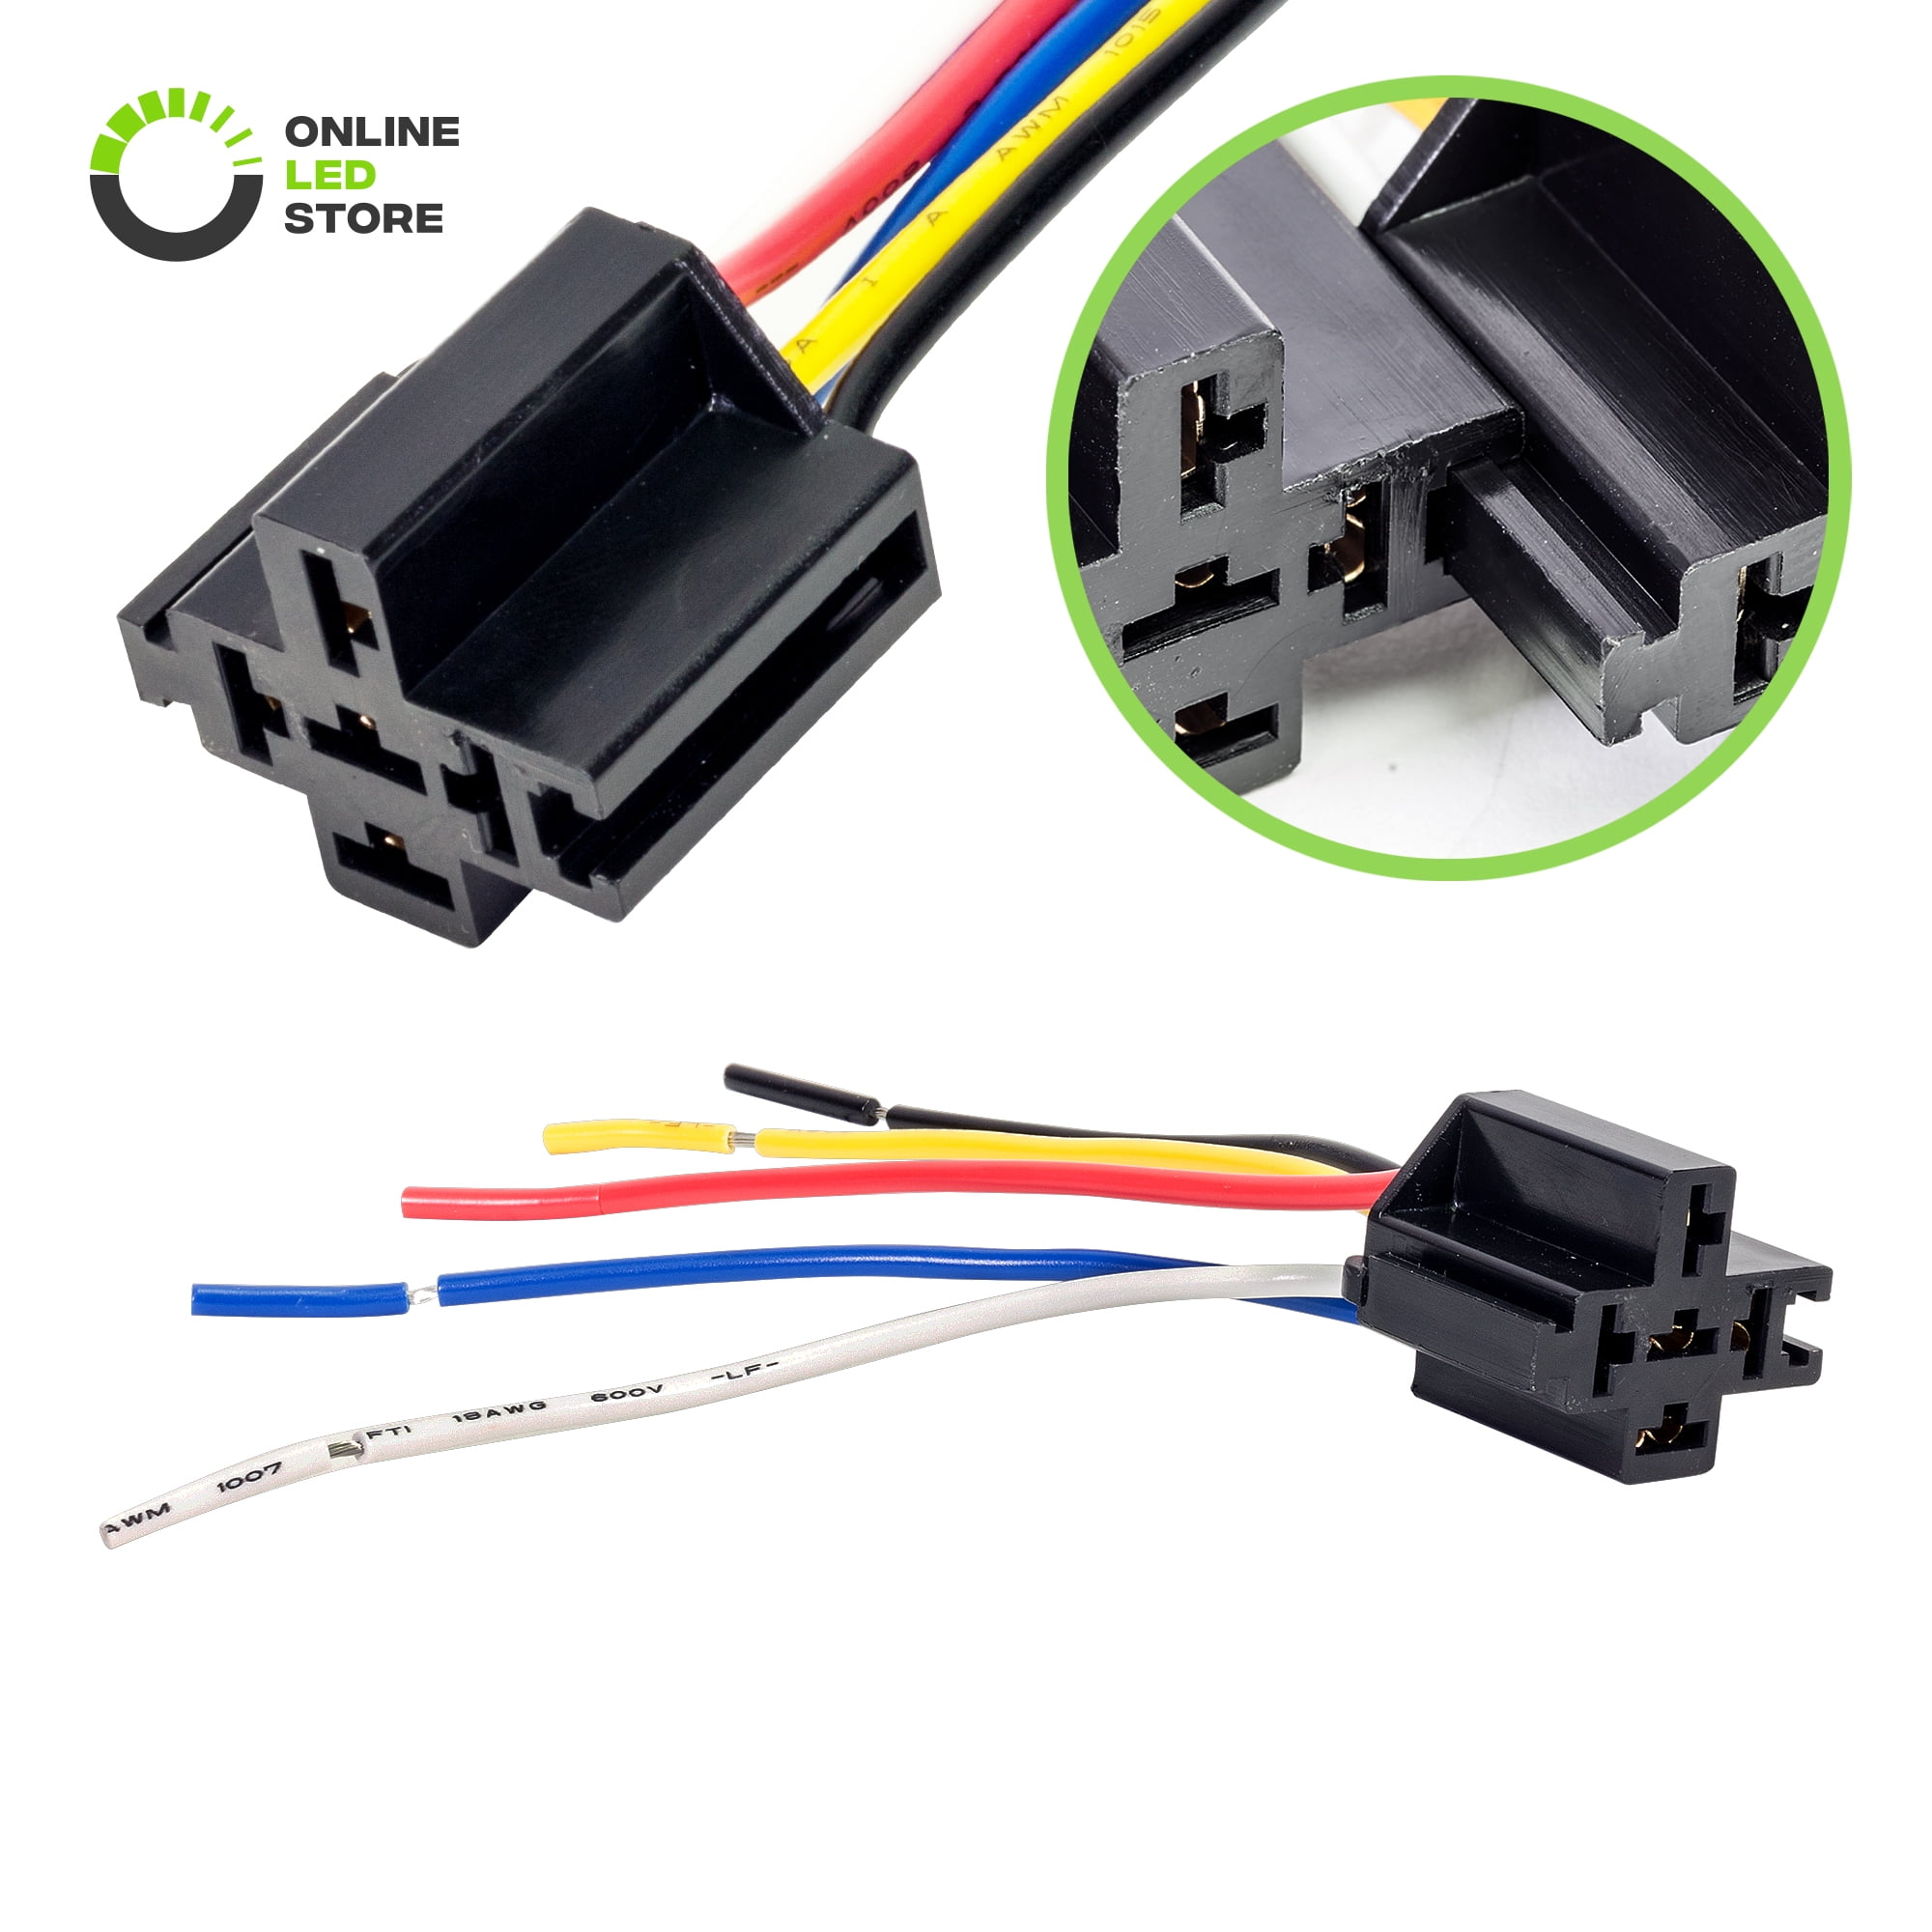 5 Pin Connector harness Plug For Relays And Many Other Uses 12v/24v TOP Quality